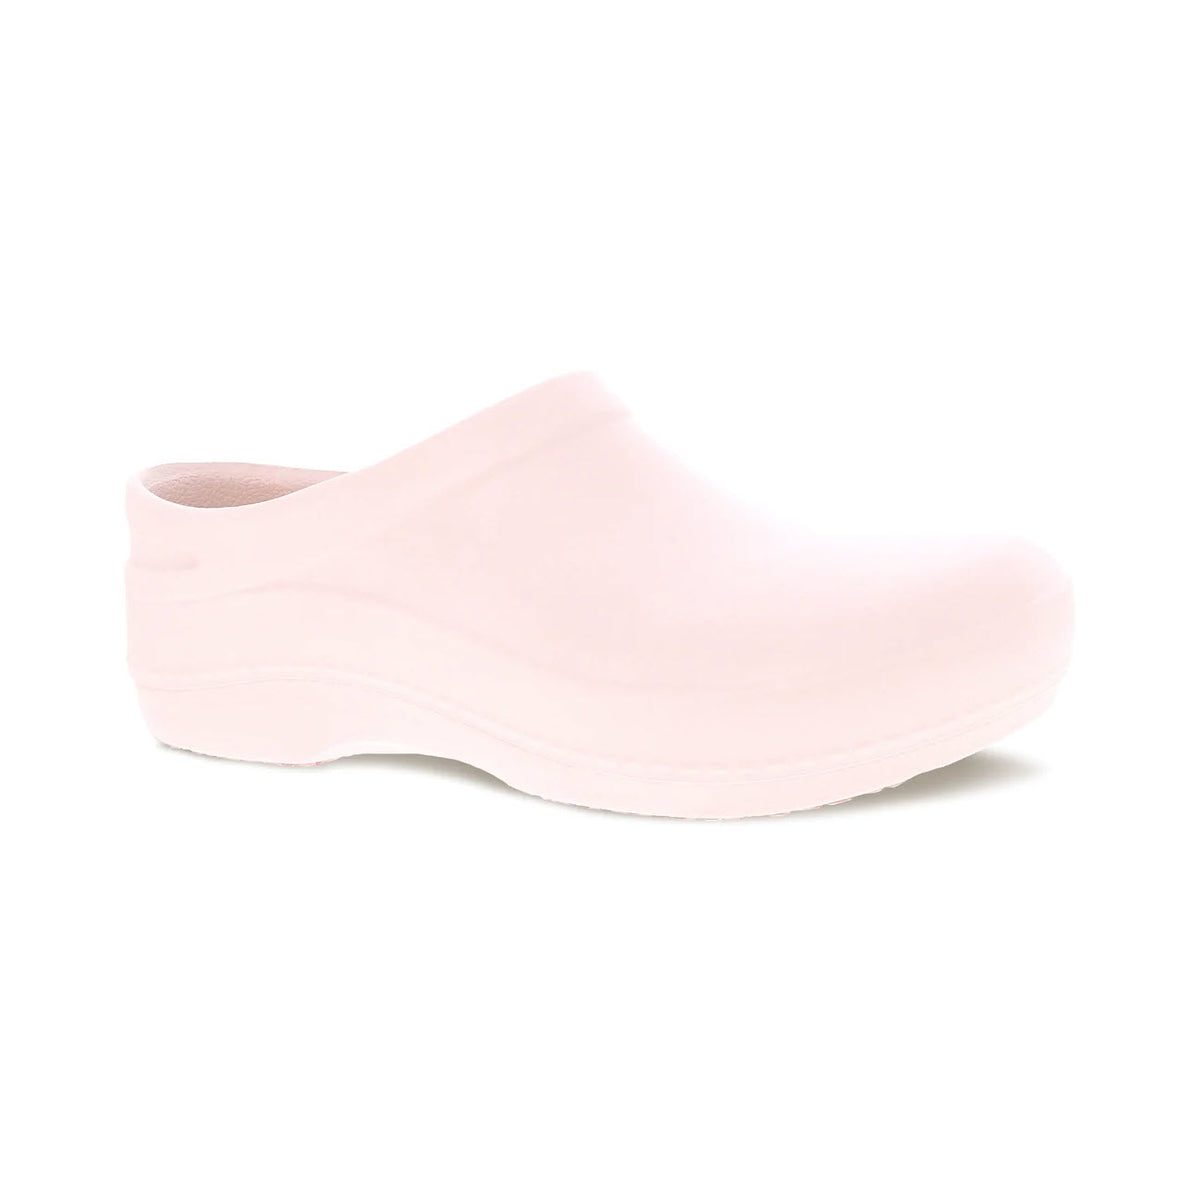 A single Dansko Kaci Pink clog shoe with a closed top and open back, featuring a slip-resistant rubber outsole, displayed on a white background.